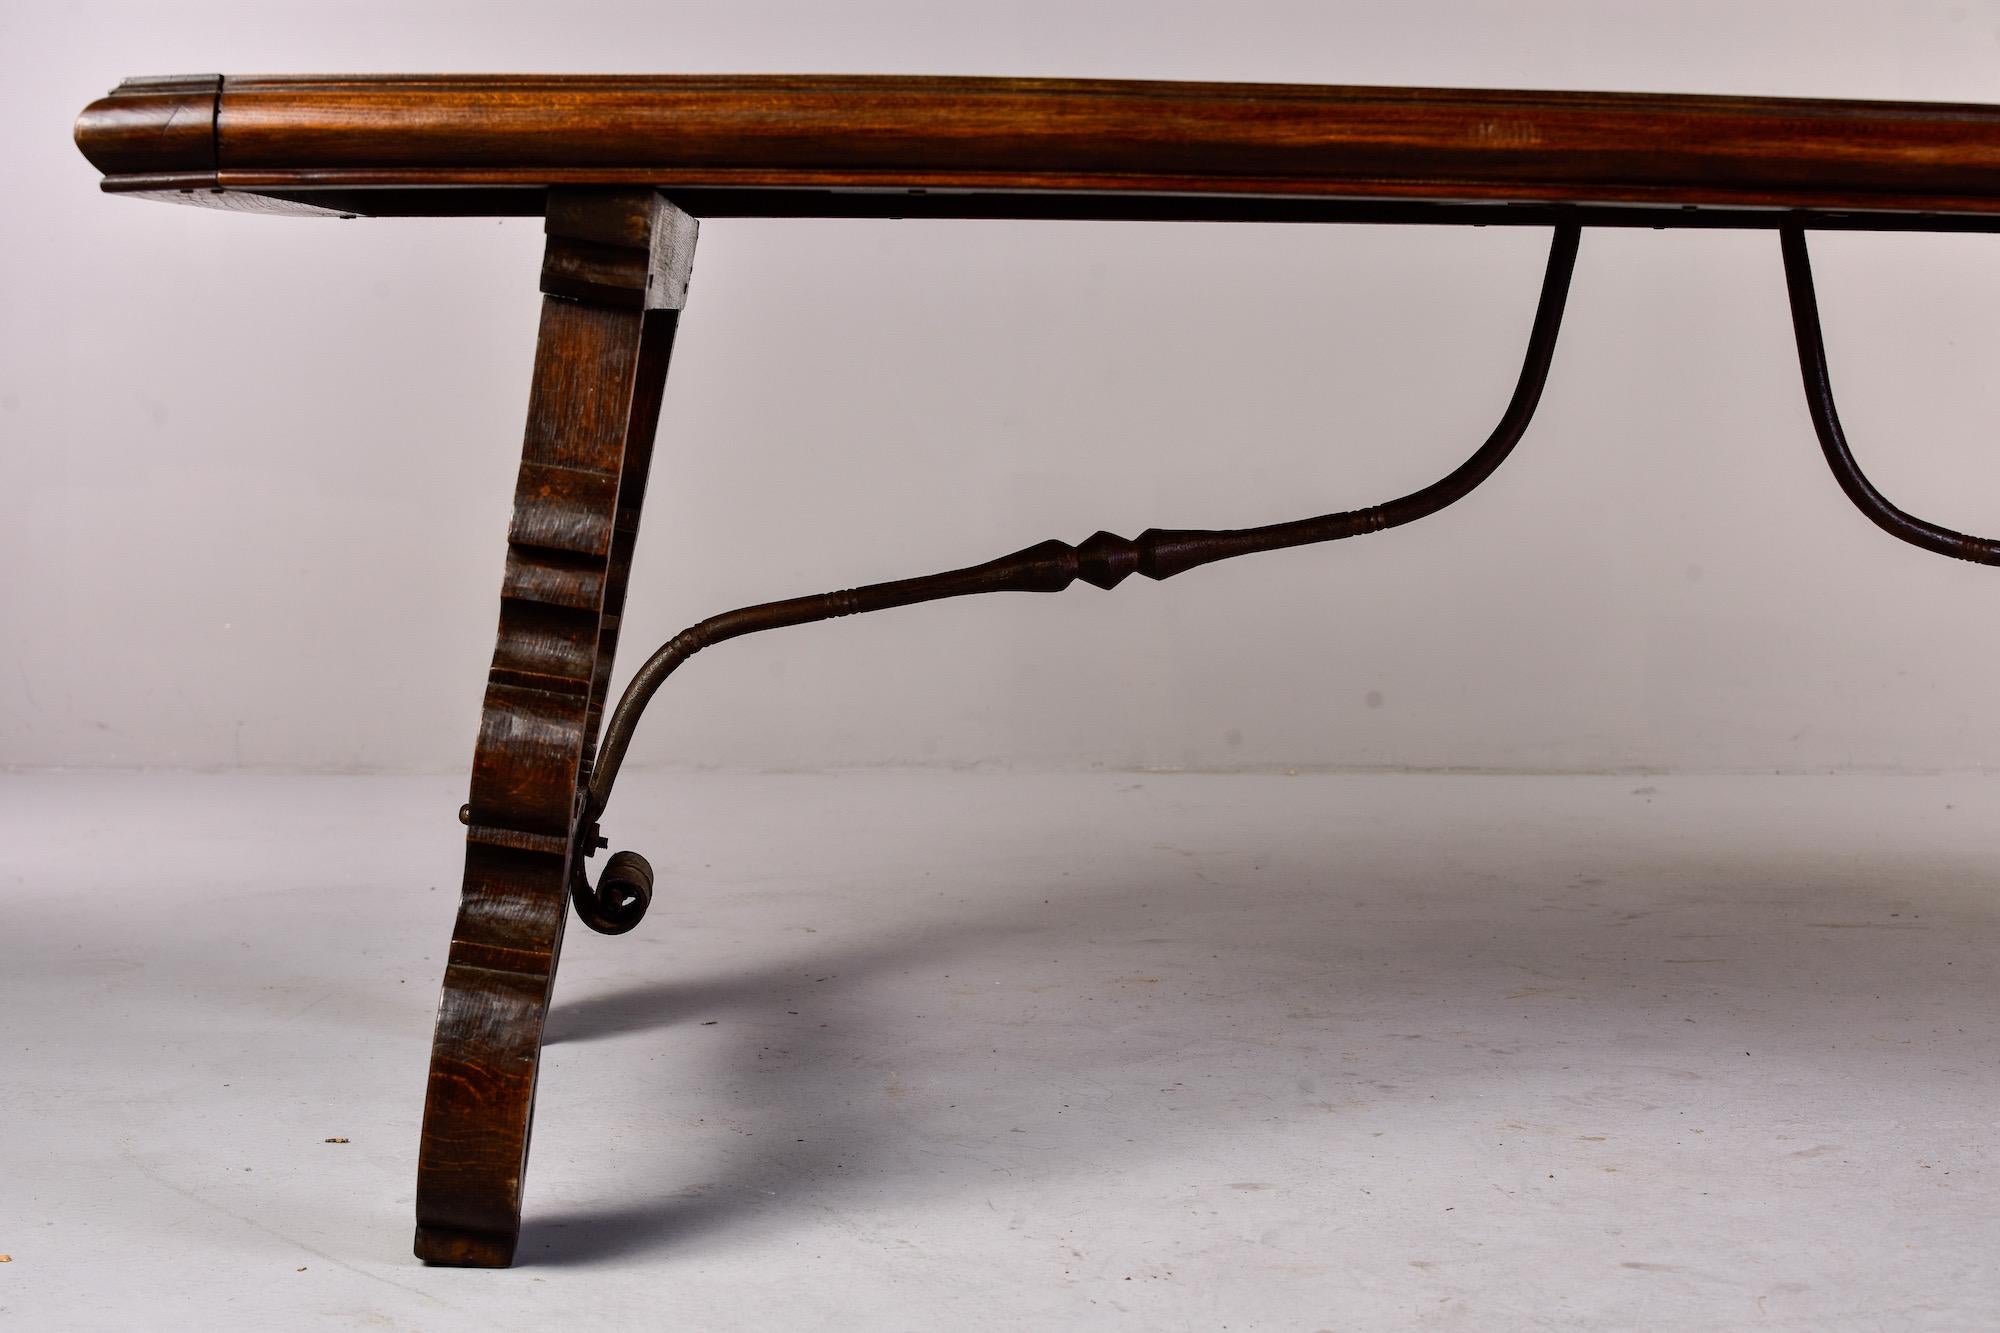 Large 19th C Spanish Walnut Table with Marquetry Top and Iron Stretcher In Good Condition For Sale In Troy, MI